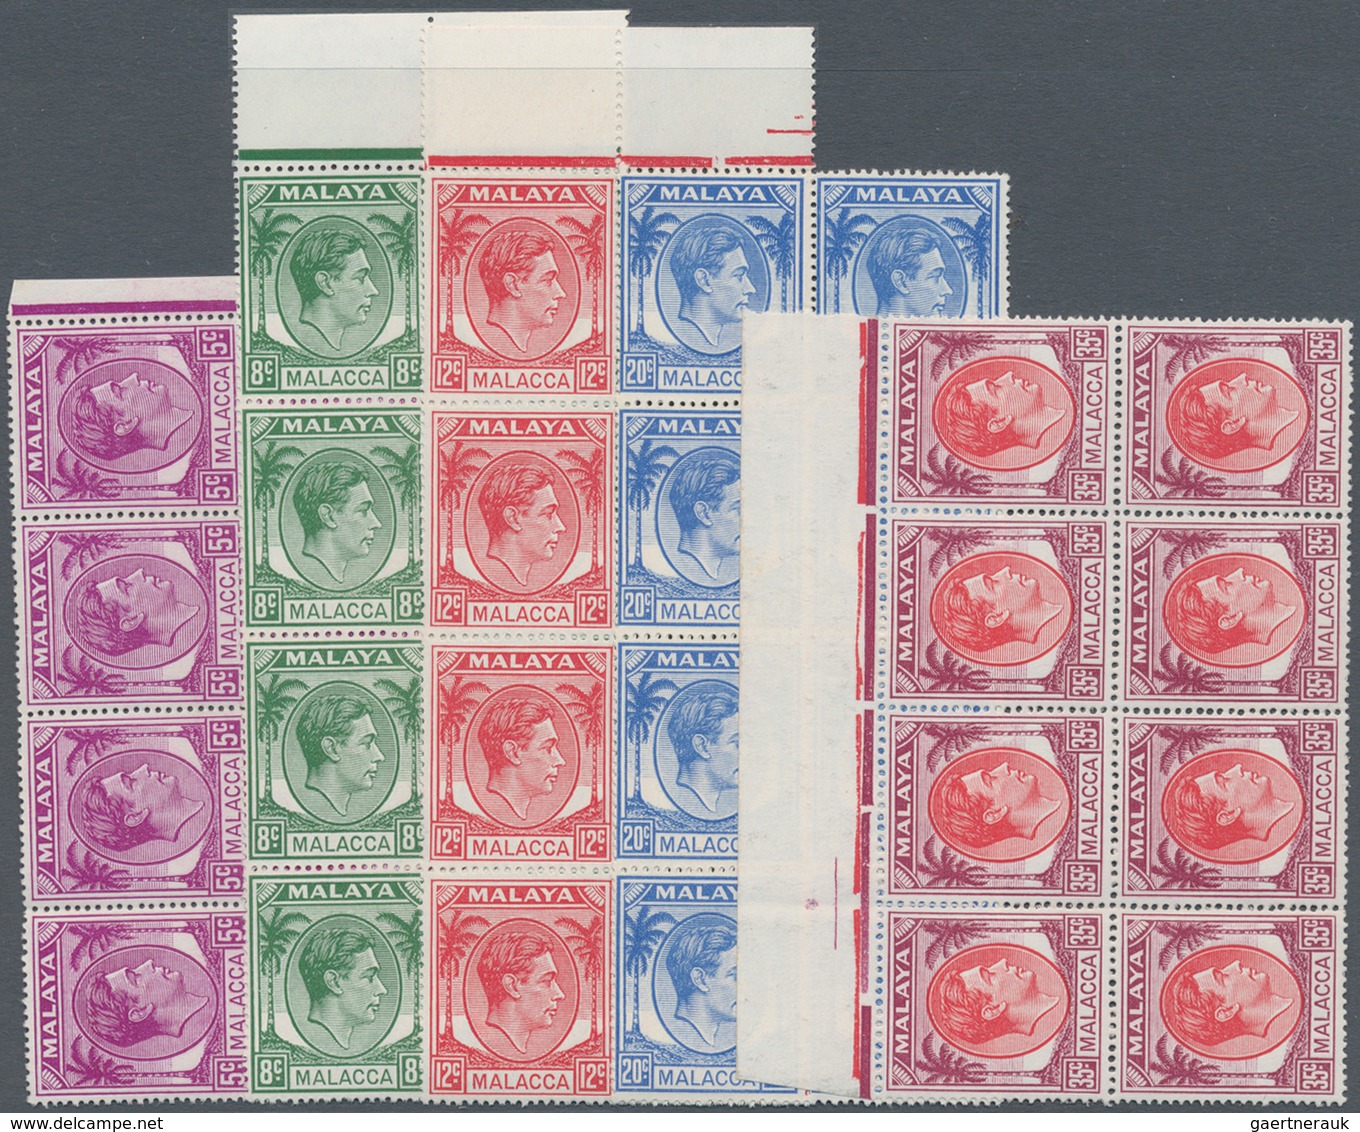 Malaiische Staaten - Malakka: 1952, KGVI Definitives Five Additional Issued Values Incl. 5c. Purple, - Malacca